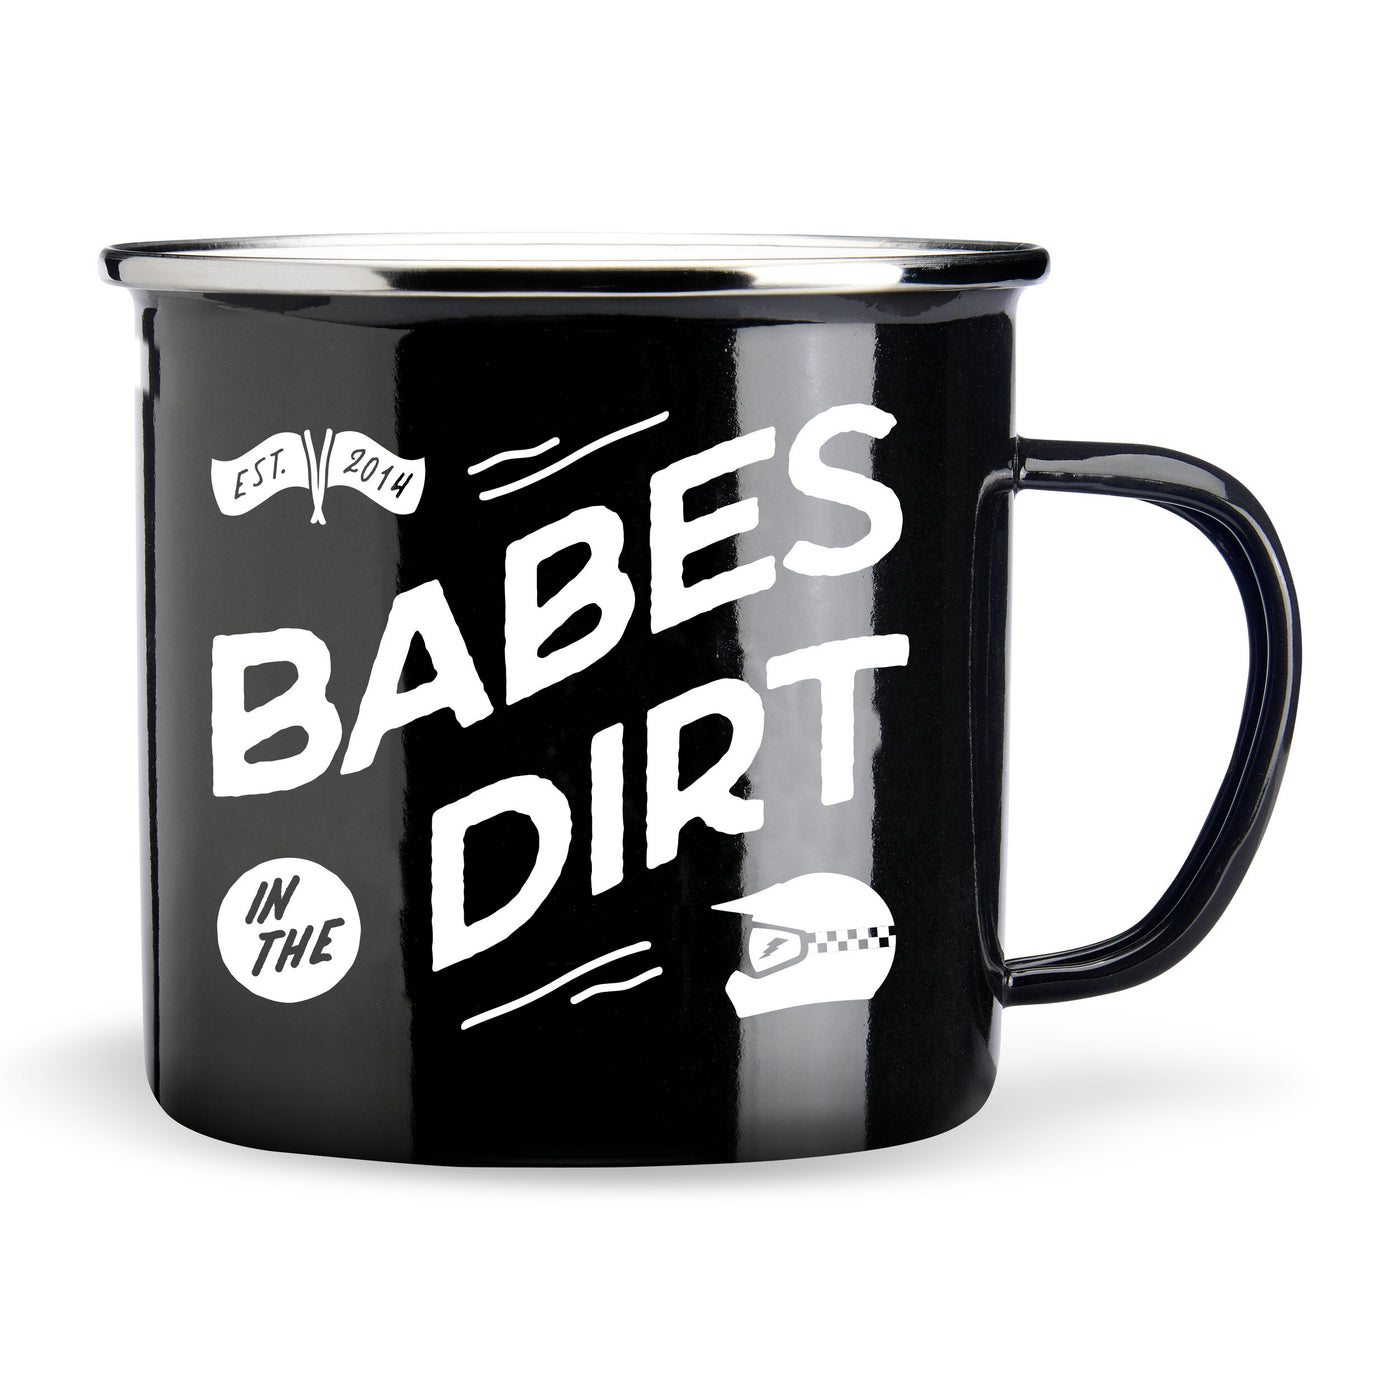 Babes in the Dirt Camp Mug